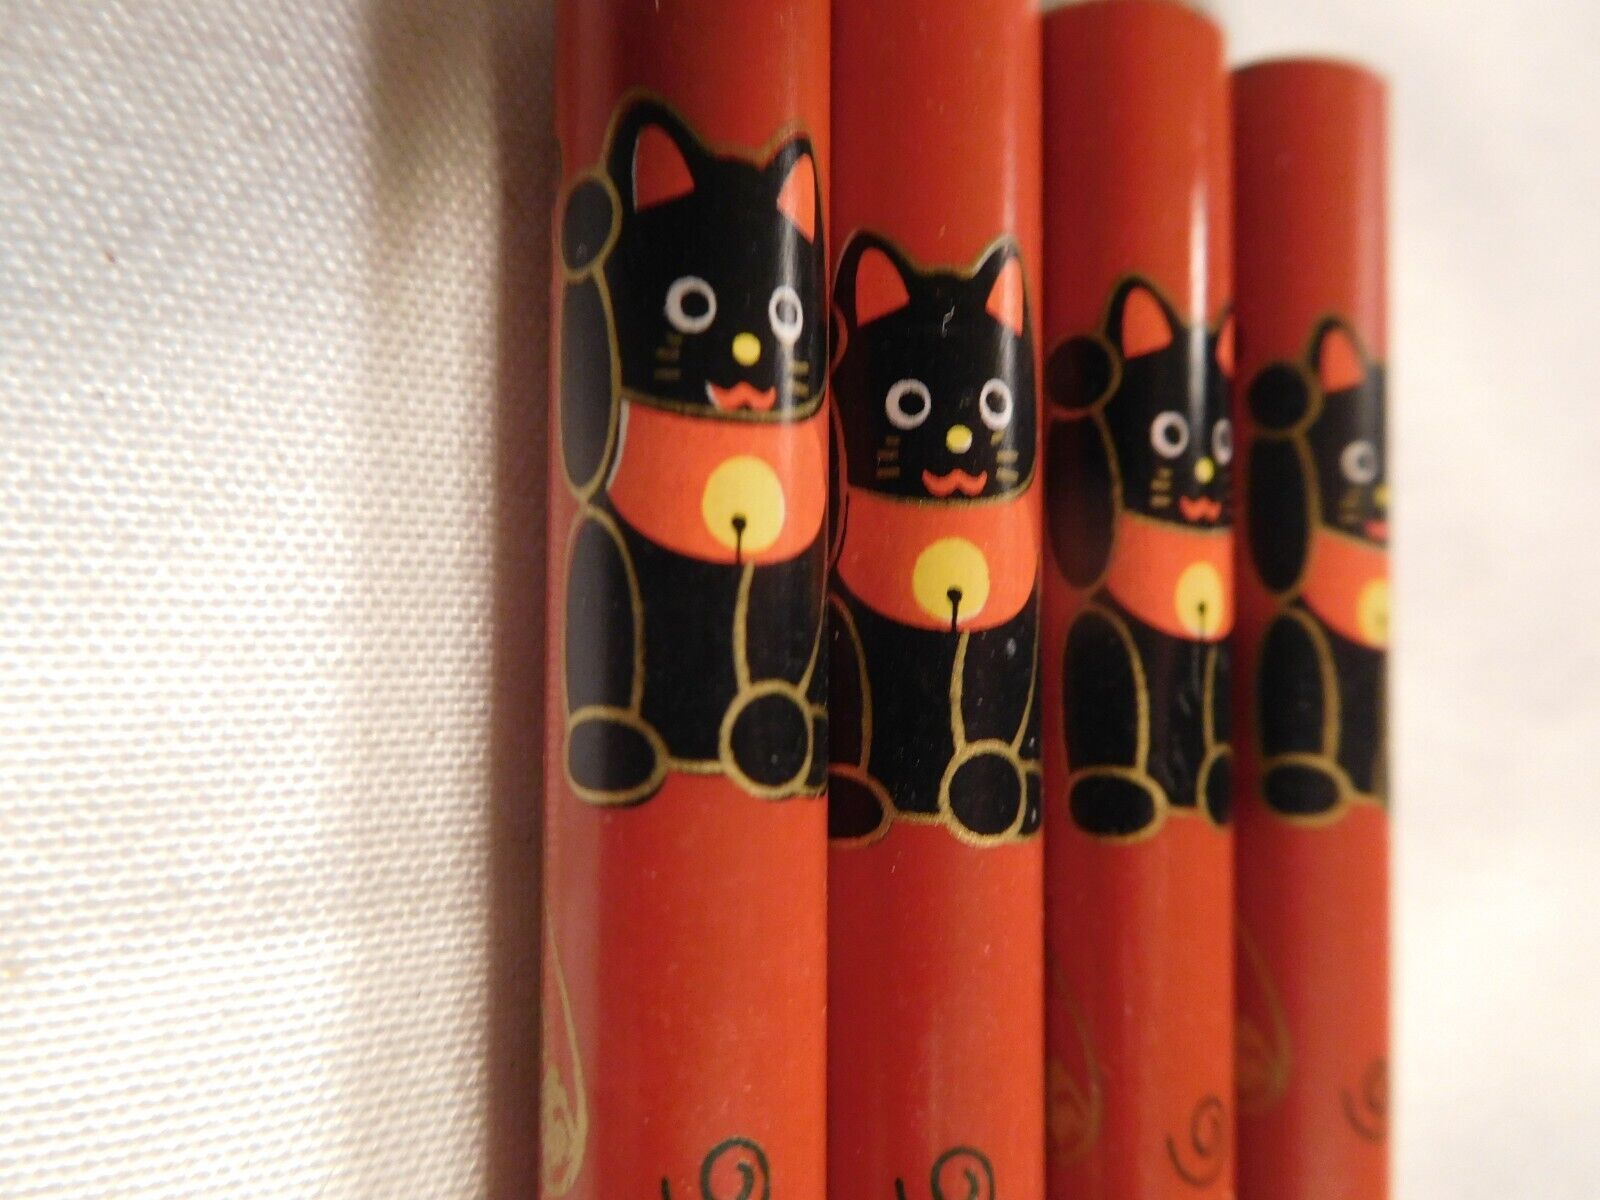 2 Pr. Vintage China / Japan Red Round Chopsticks Hand Painted Waving Cats Kittys